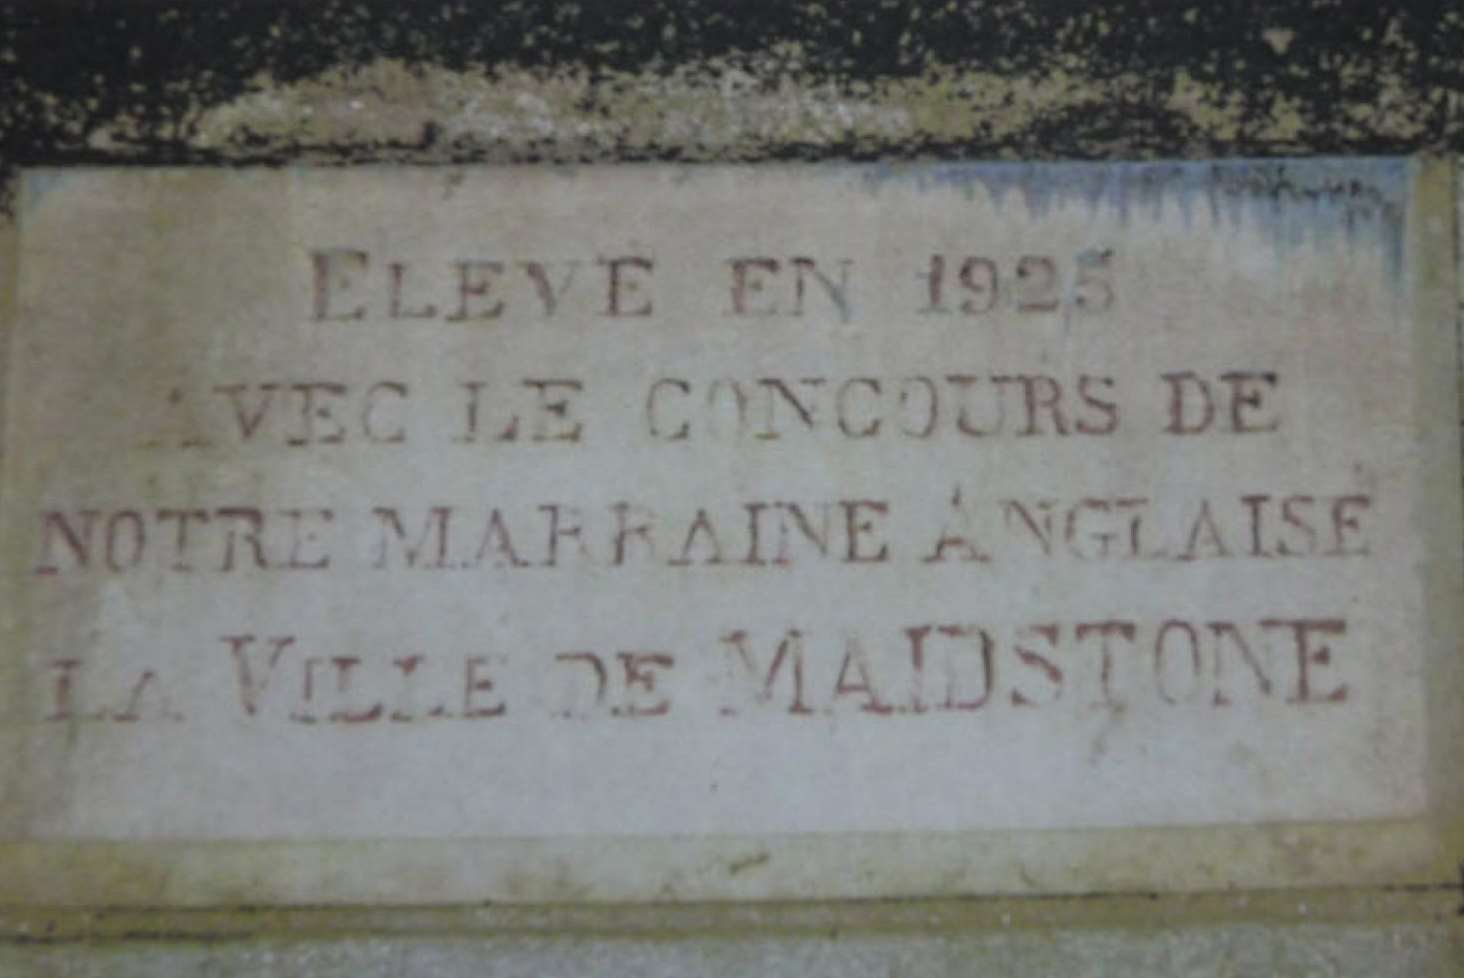 The inscription on the tower